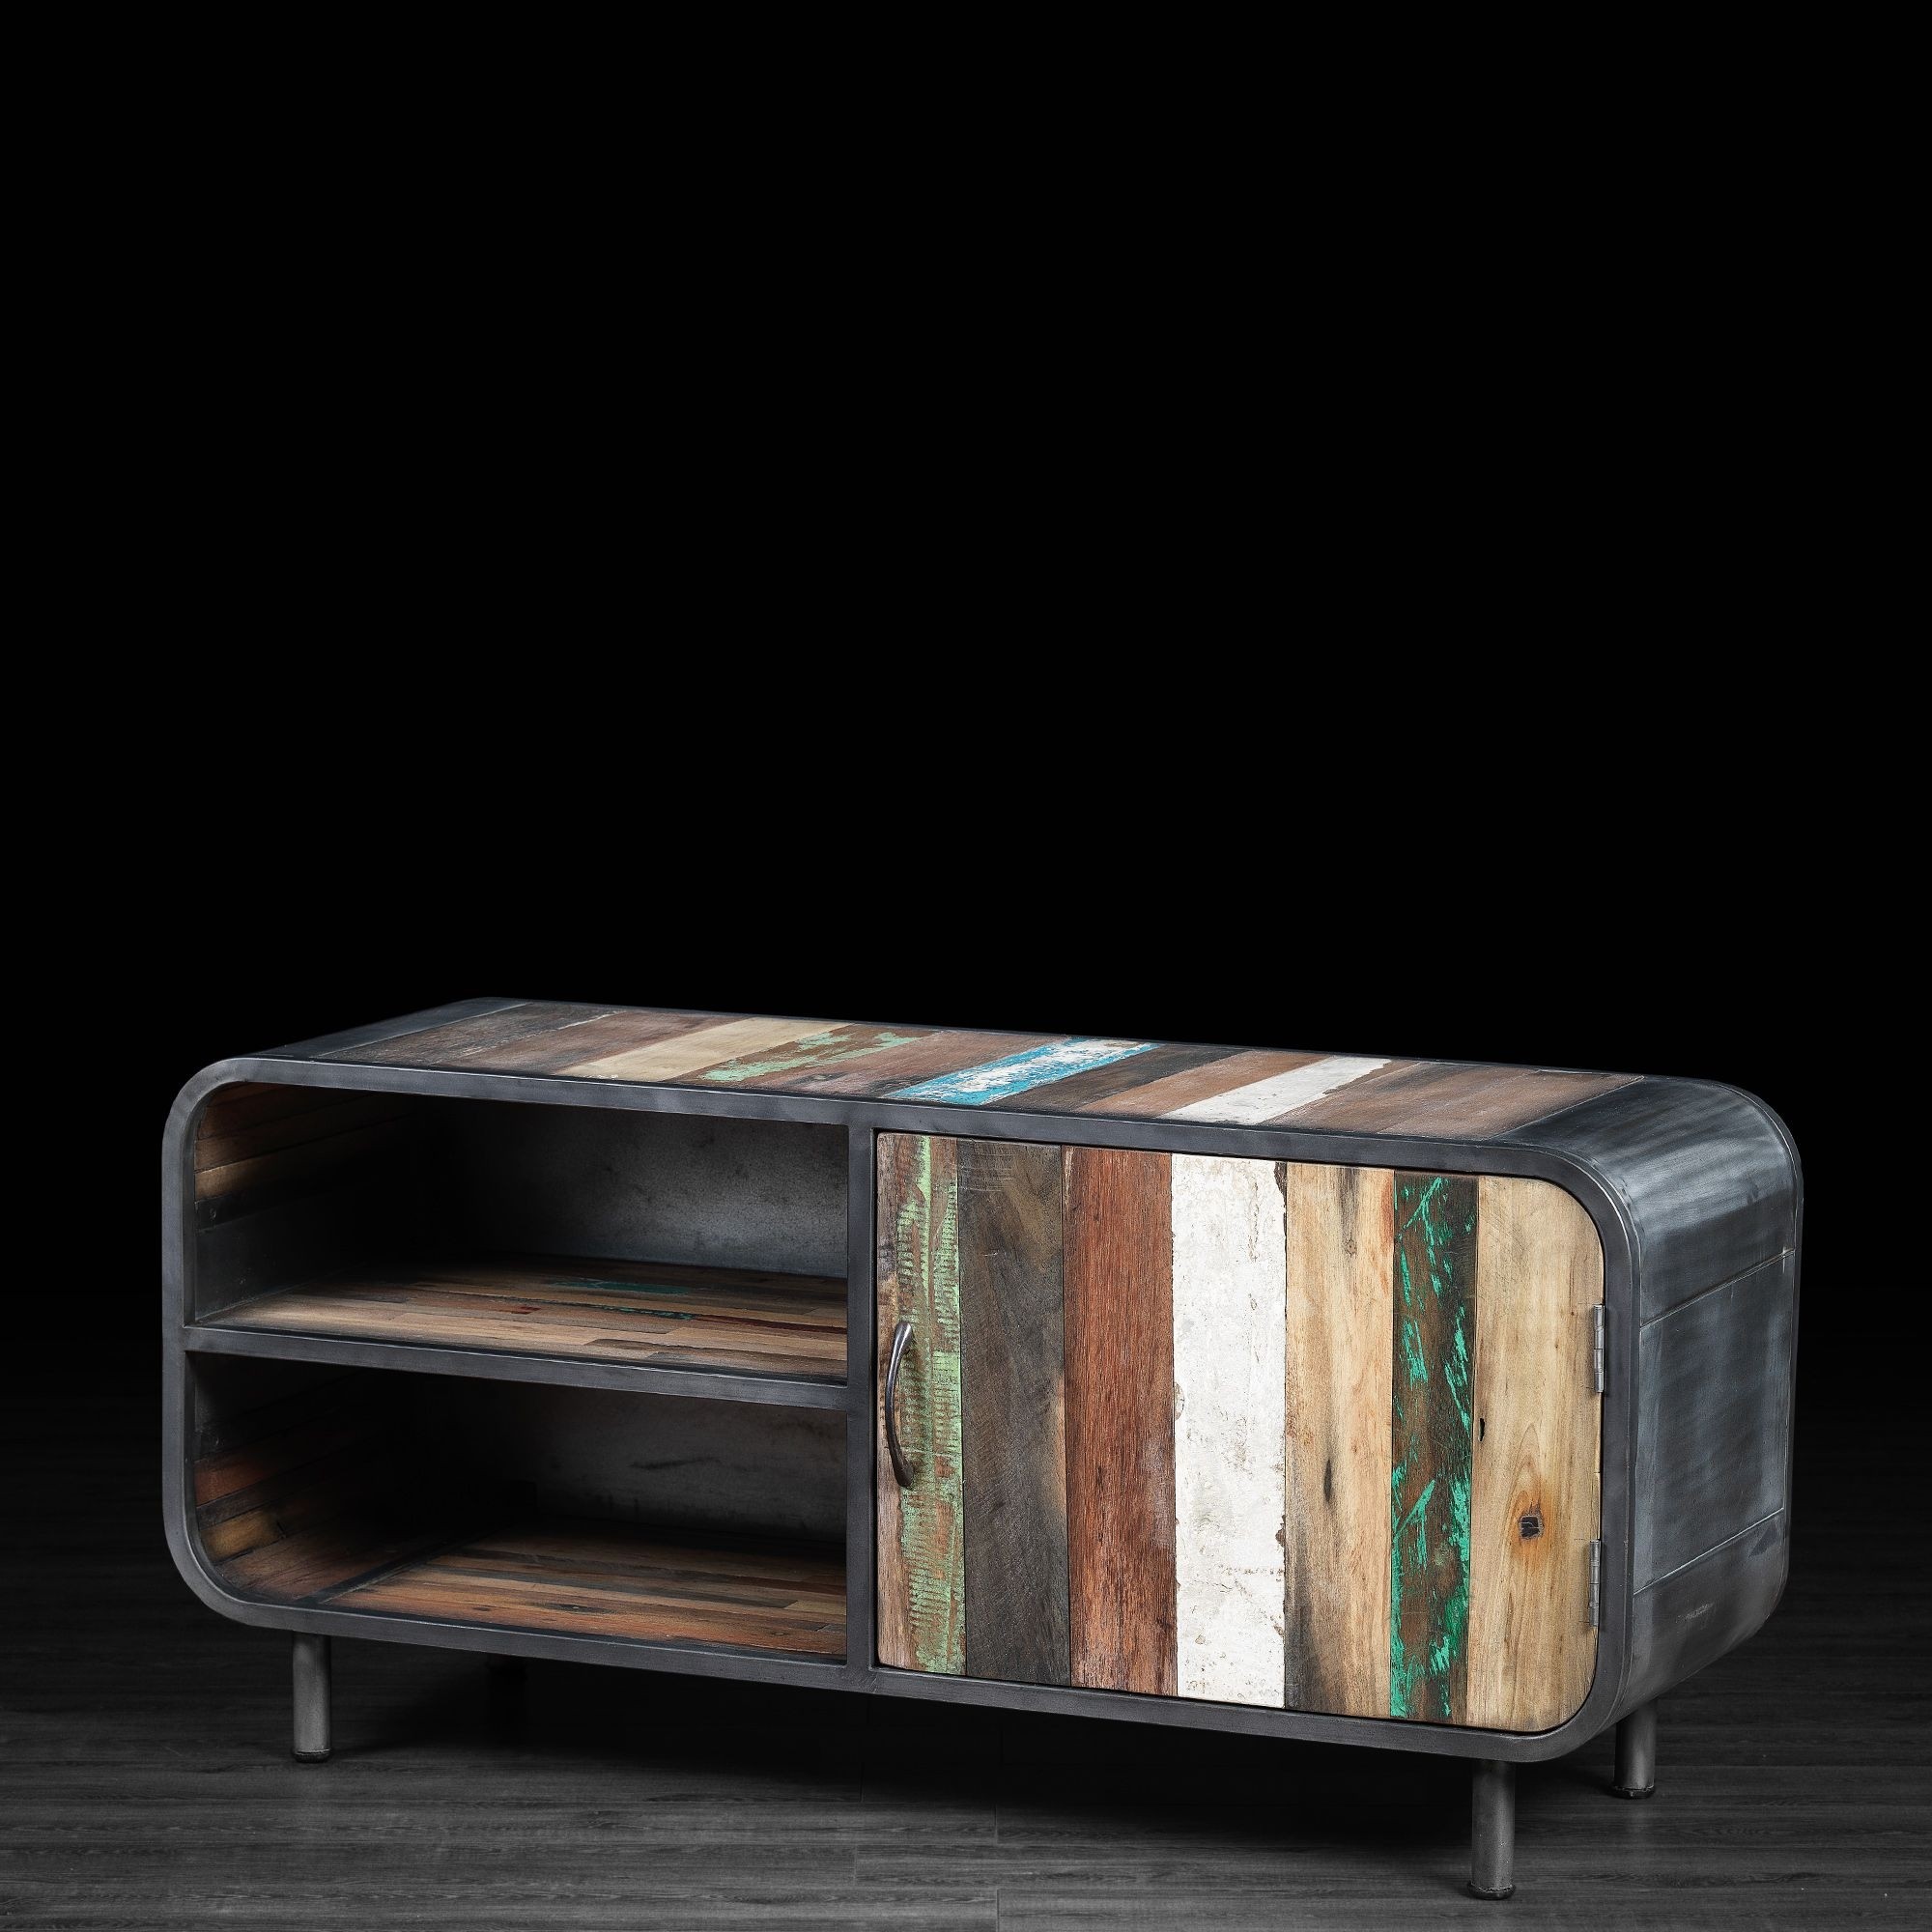 Media console stand made of recycled